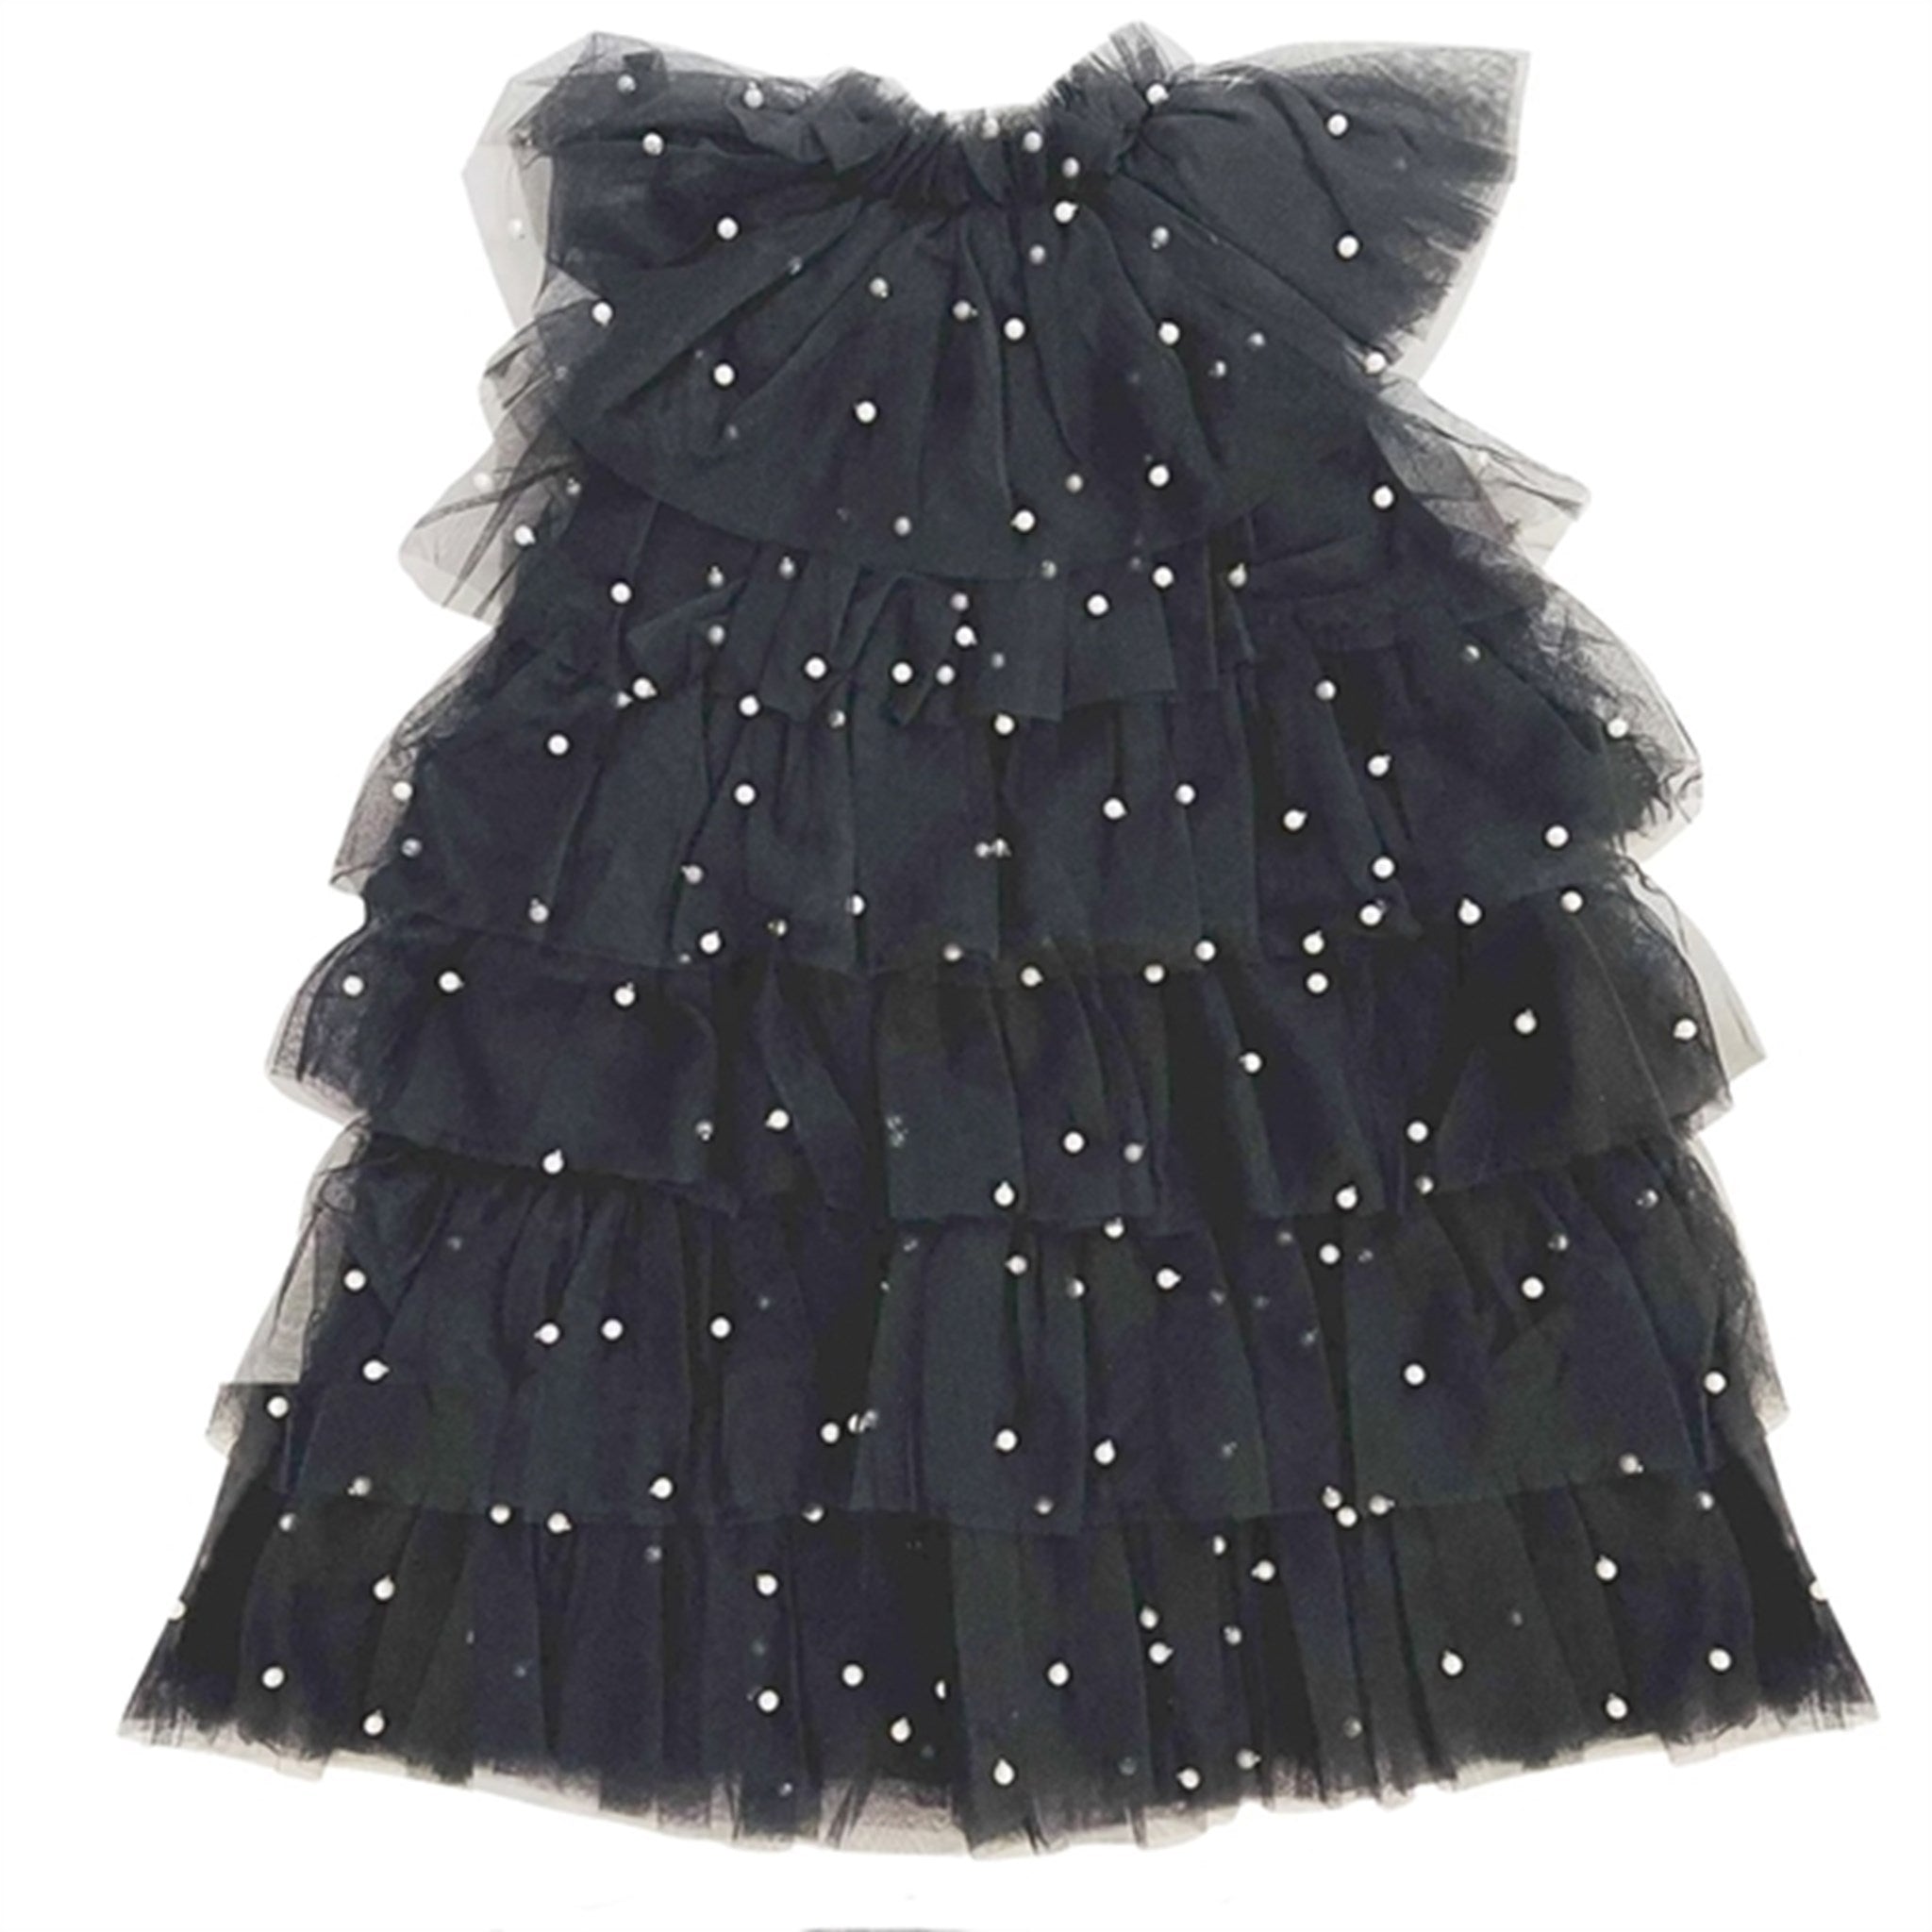 Dolly by Le Petit Tom Pearl Tutully Tiered Tulle Tuttu Klänning Black